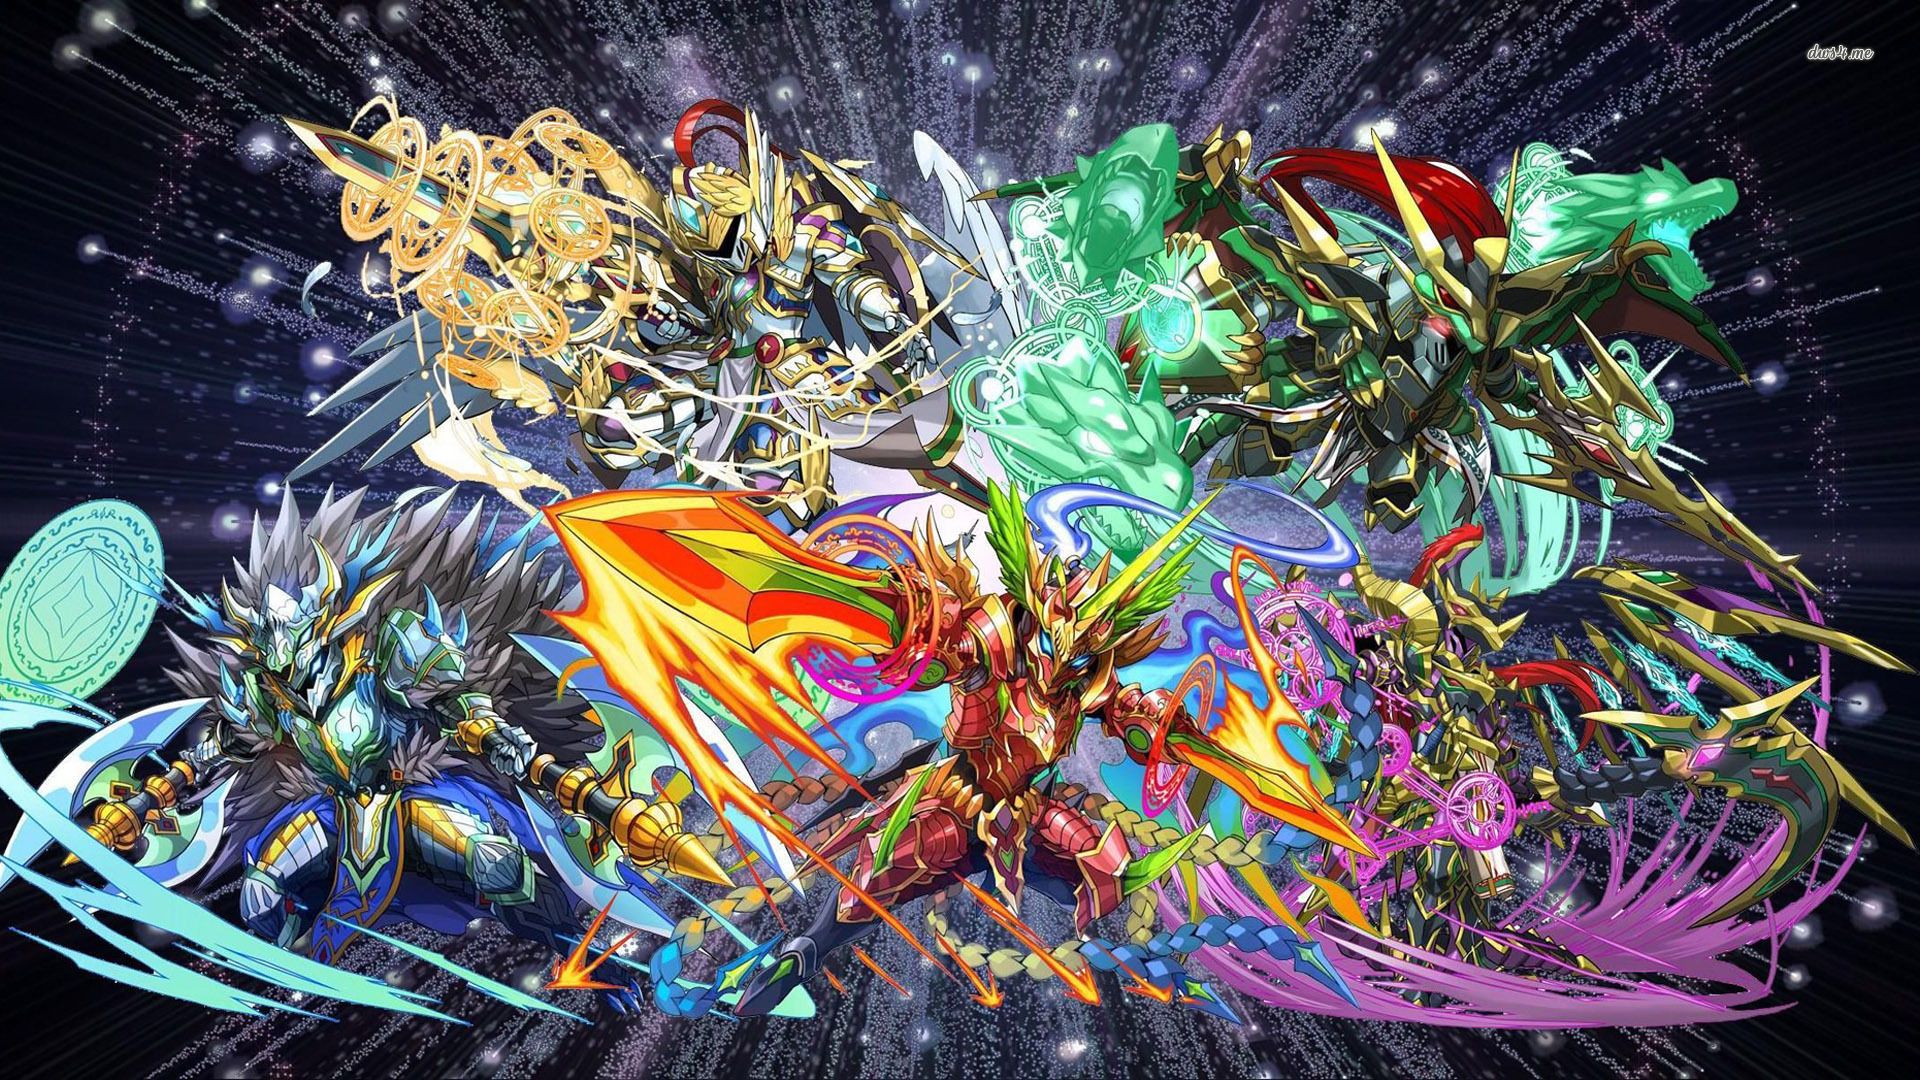 Puzzle & Dragons wallpaper - Game wallpapers - #23004